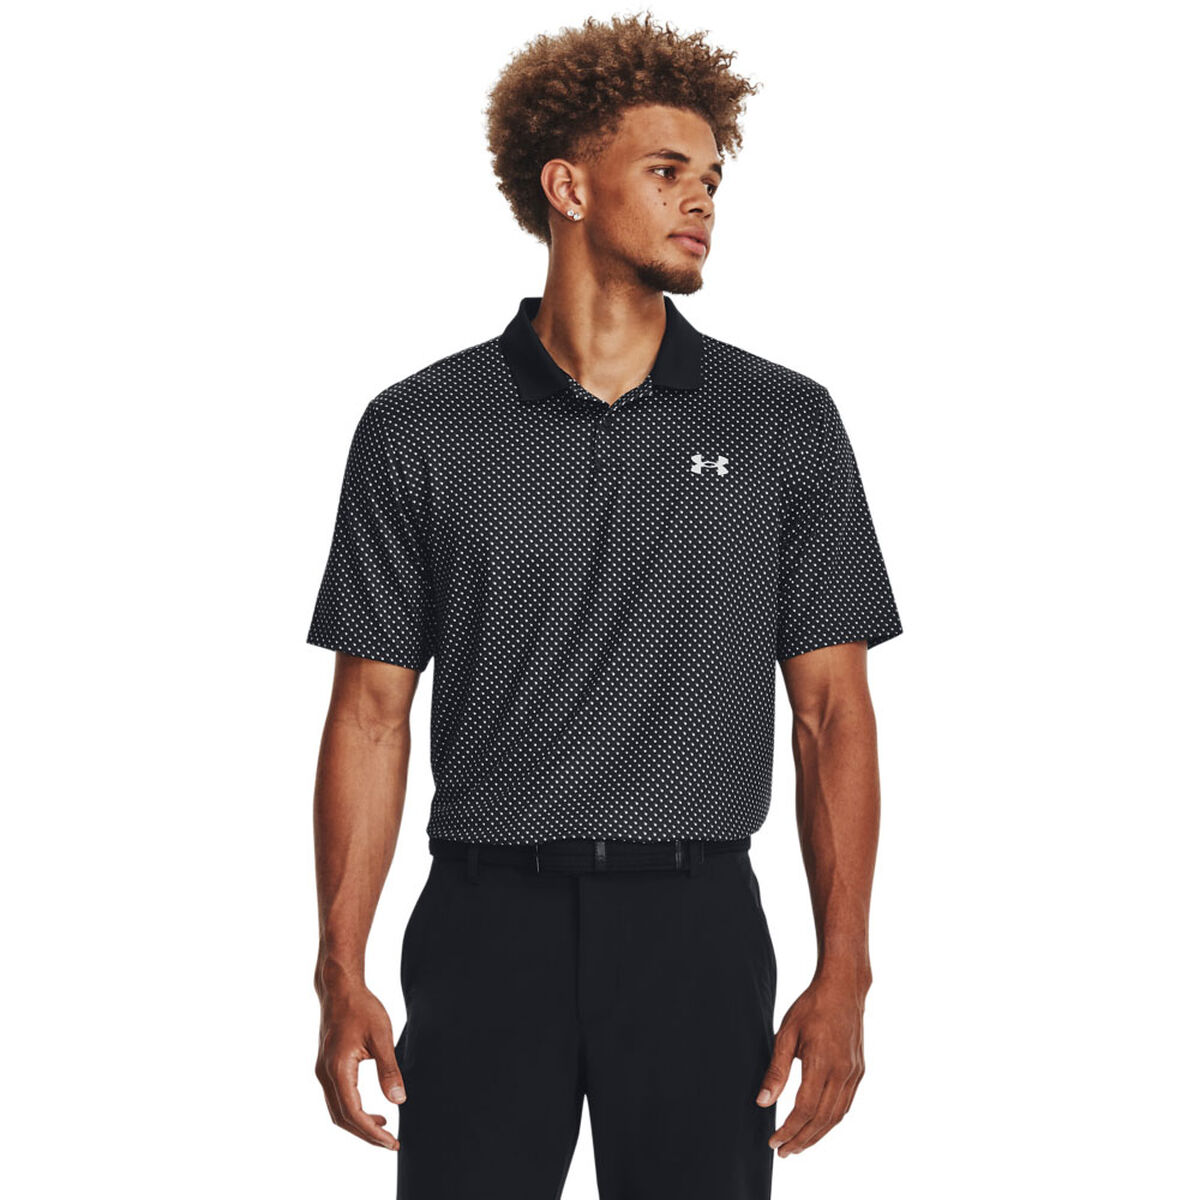 Under Armour Men’s Performance 3.0 Printed Golf Polo Shirt, Mens, Black/halo gray, Large | American Golf